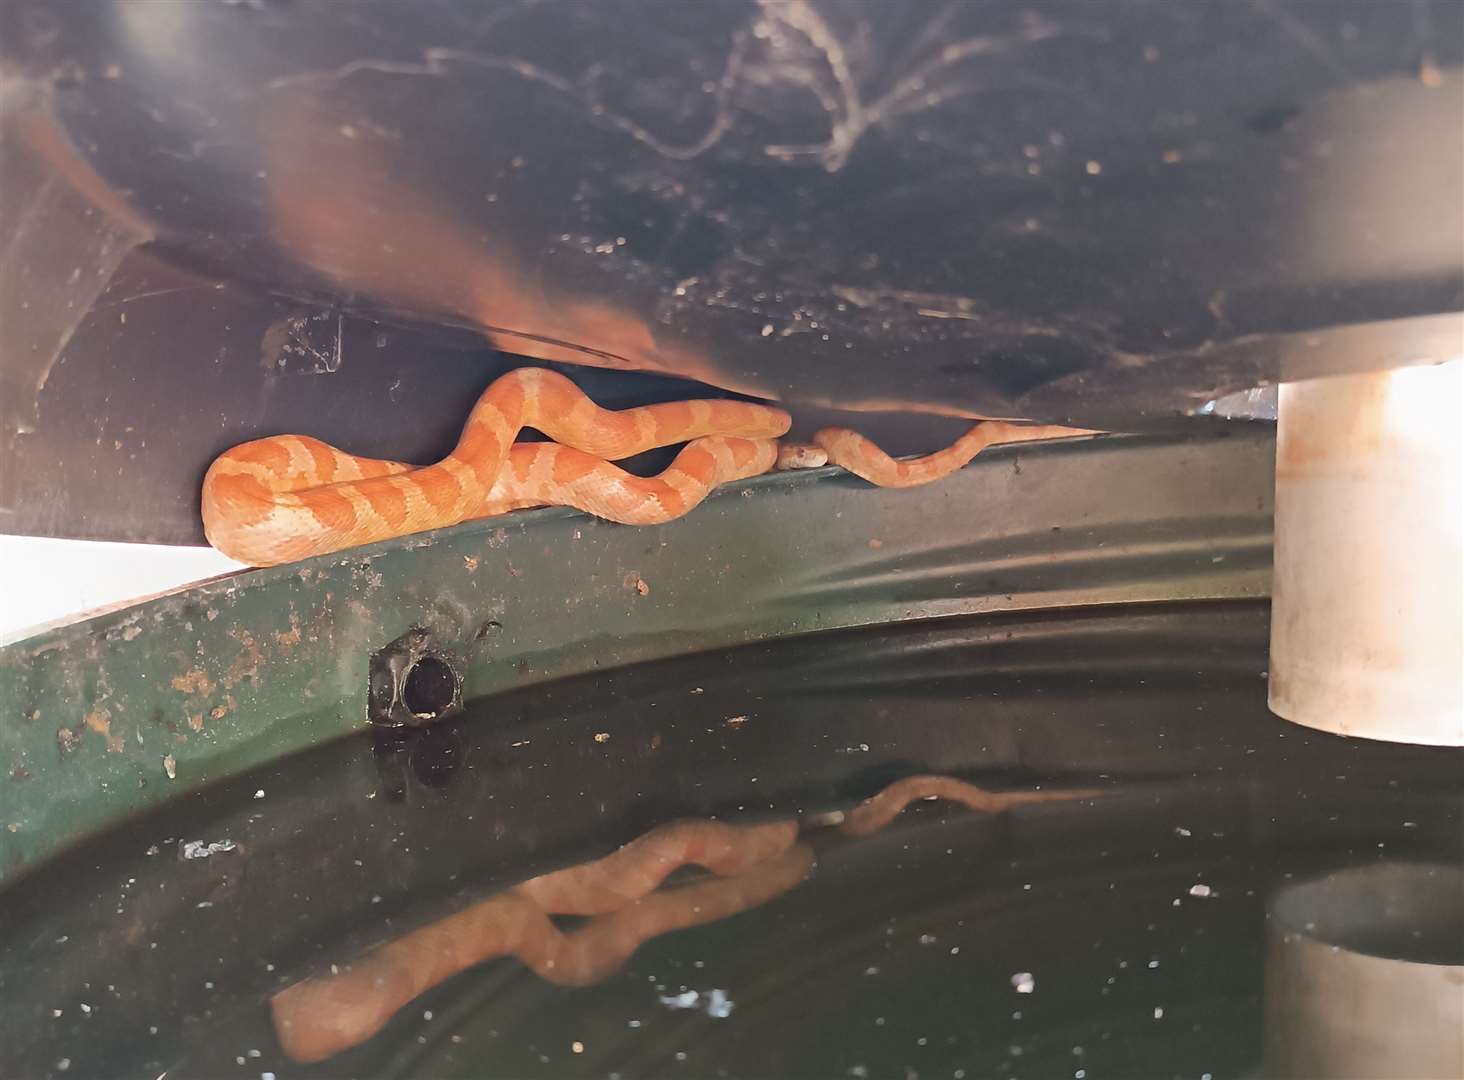 An escaped pet corn snake was discovered in a back garden in Willesborough. Picture: Phil Golding